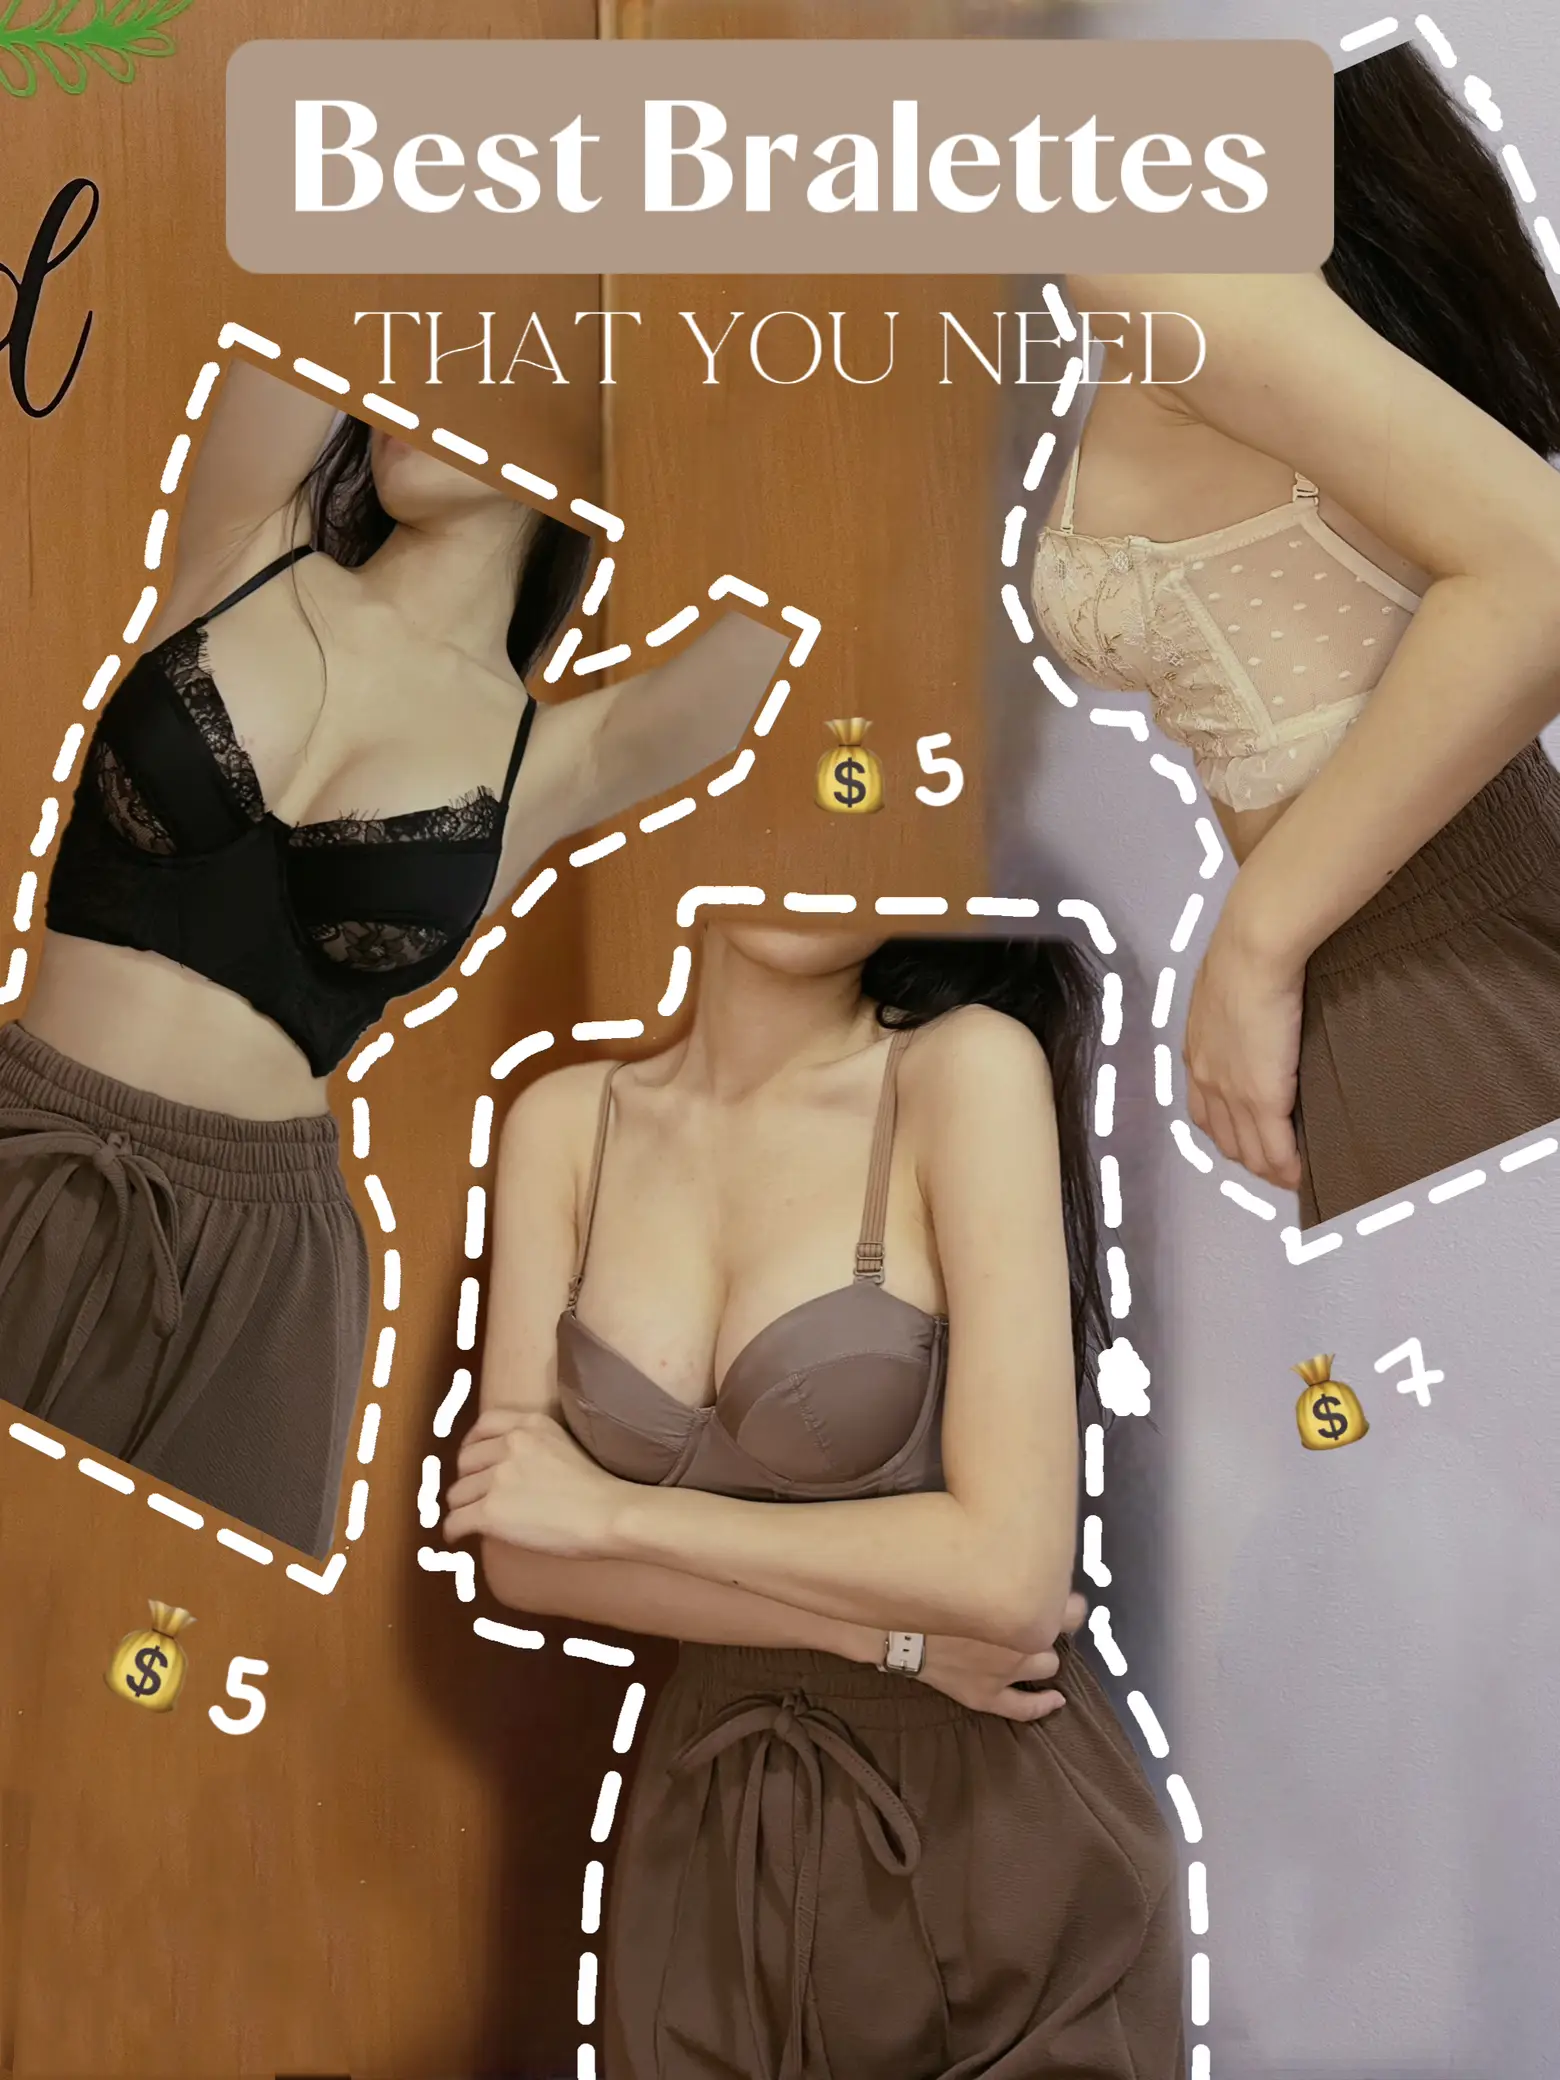 What Is a Bralette? A bralette is a lightweight bra designed particularly  for comfort and support to your breast. 💡It helps to retain the natural